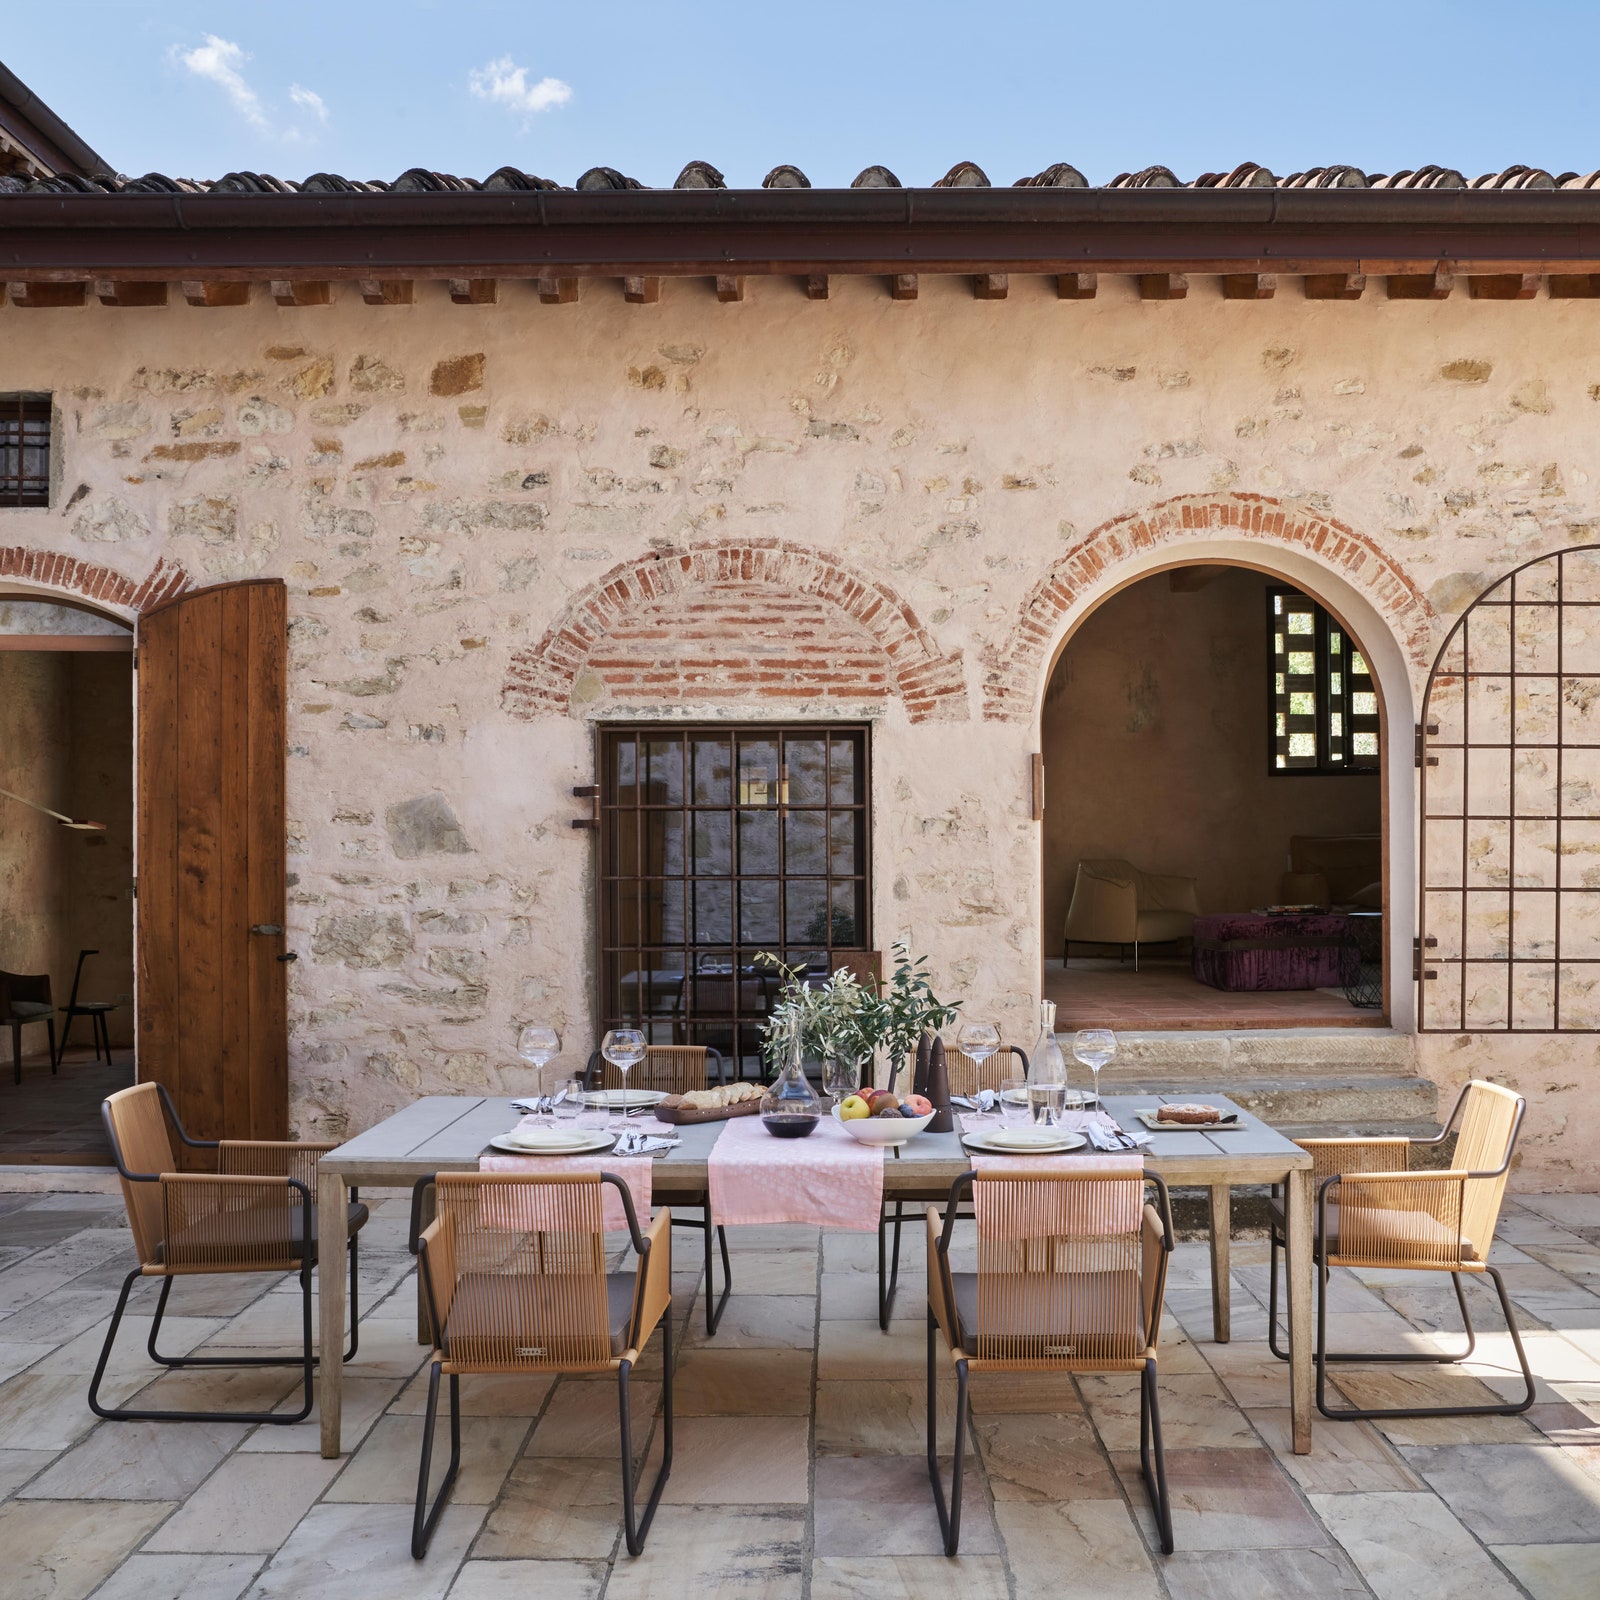 A once-dilapidated wreck in the glorious Tuscan countryside brought beautifully back to life